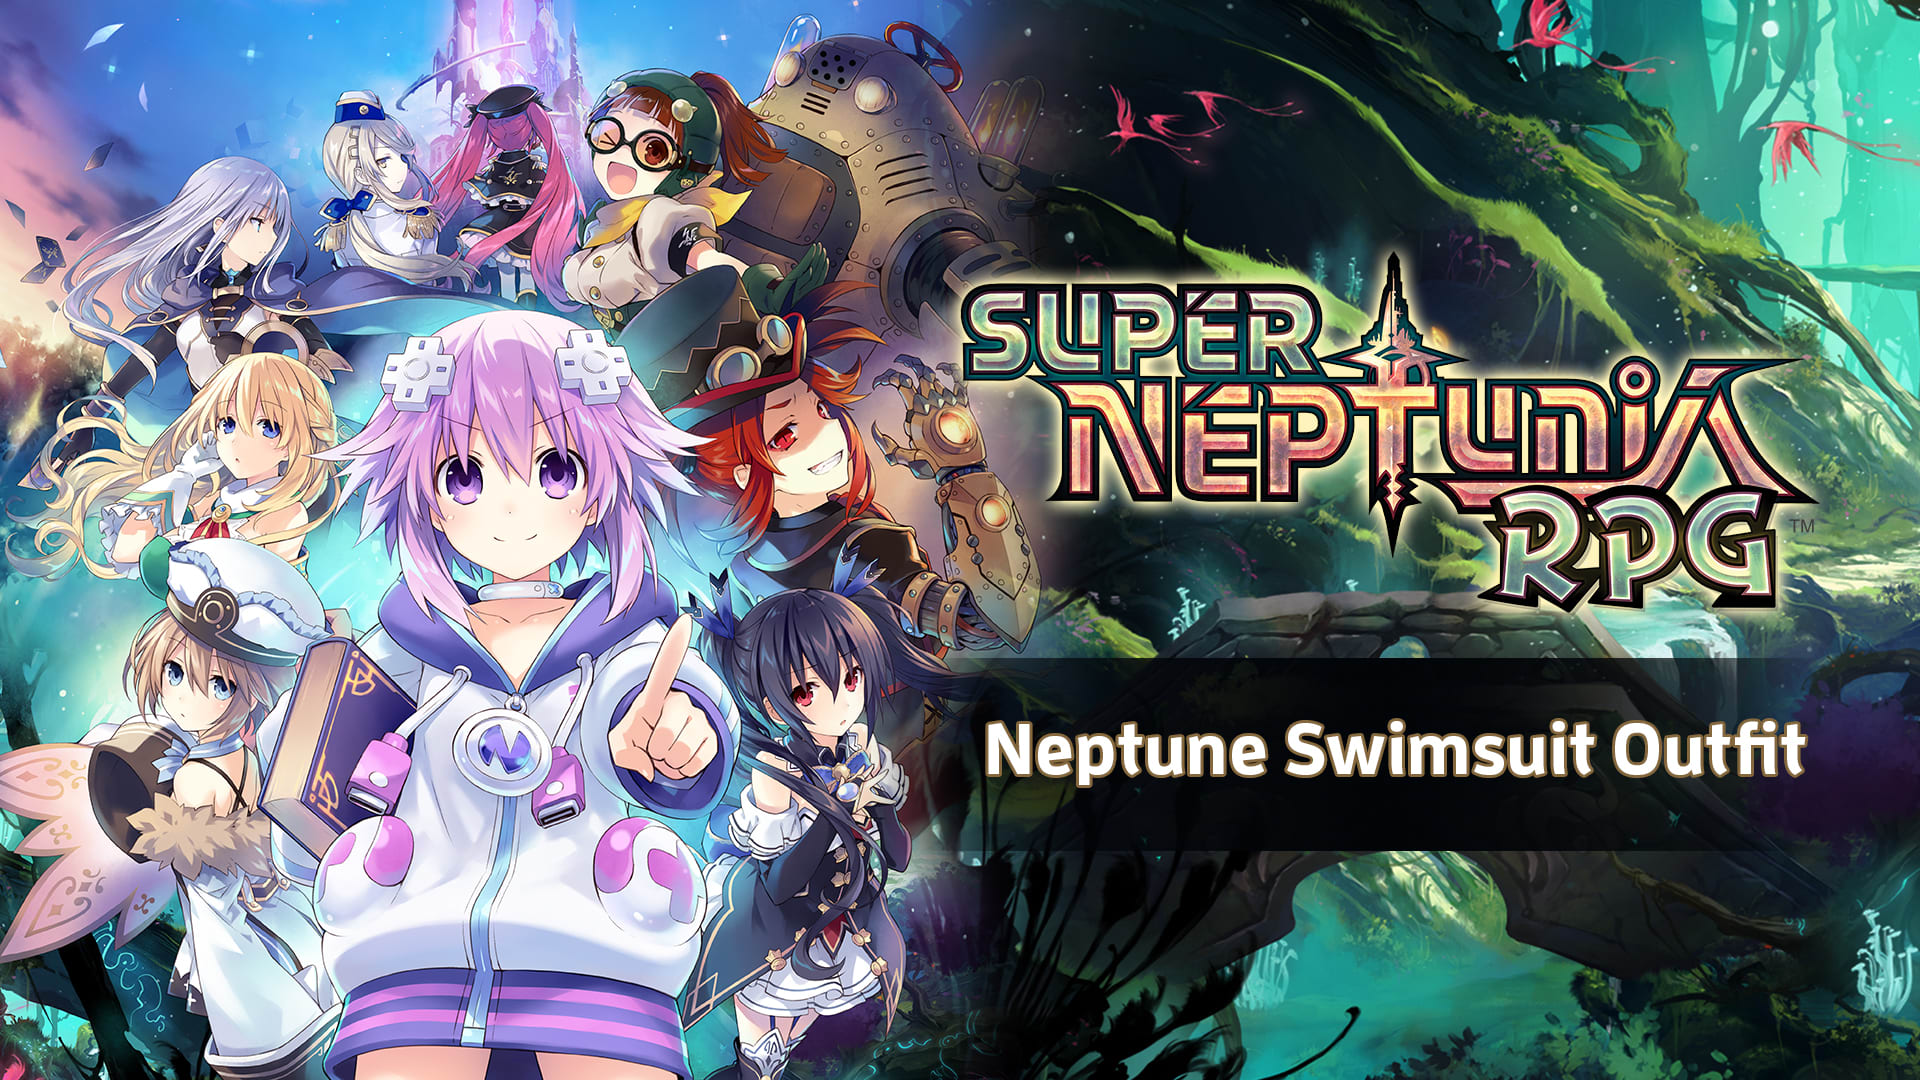 Neptune Swimsuit Outfit